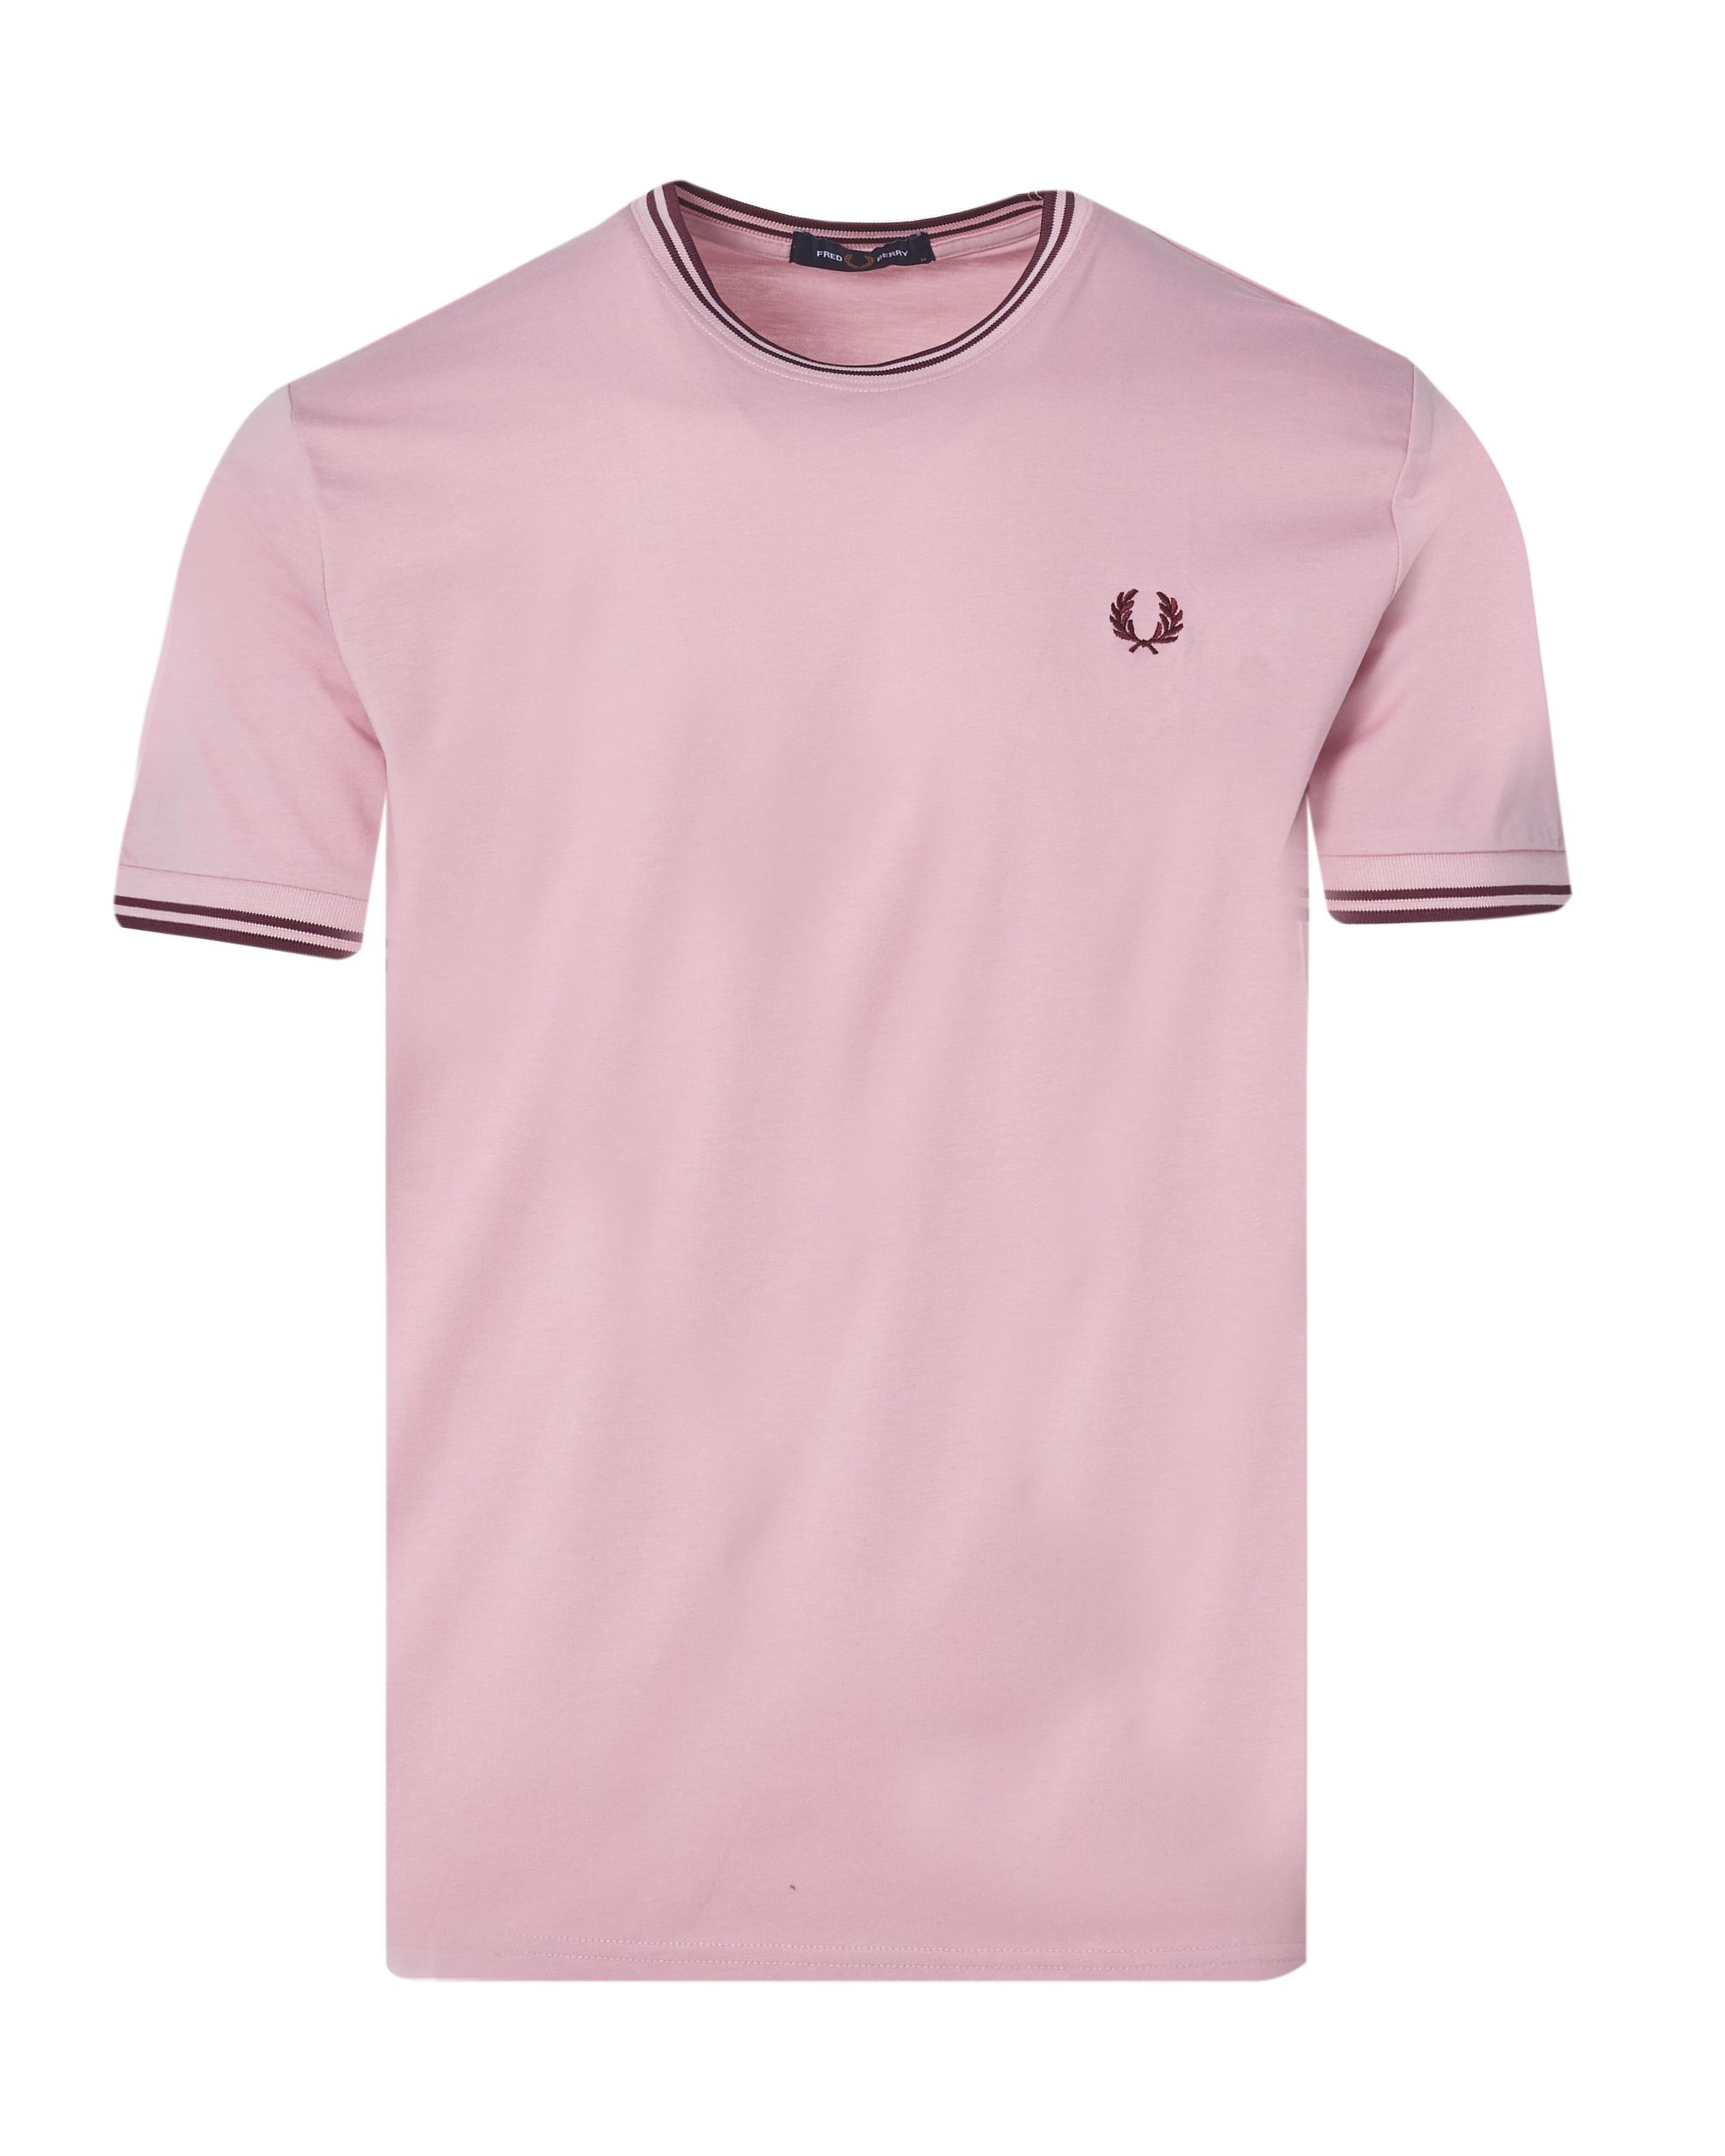 Fred Perry T-shirt KM Roze 083513-001-L